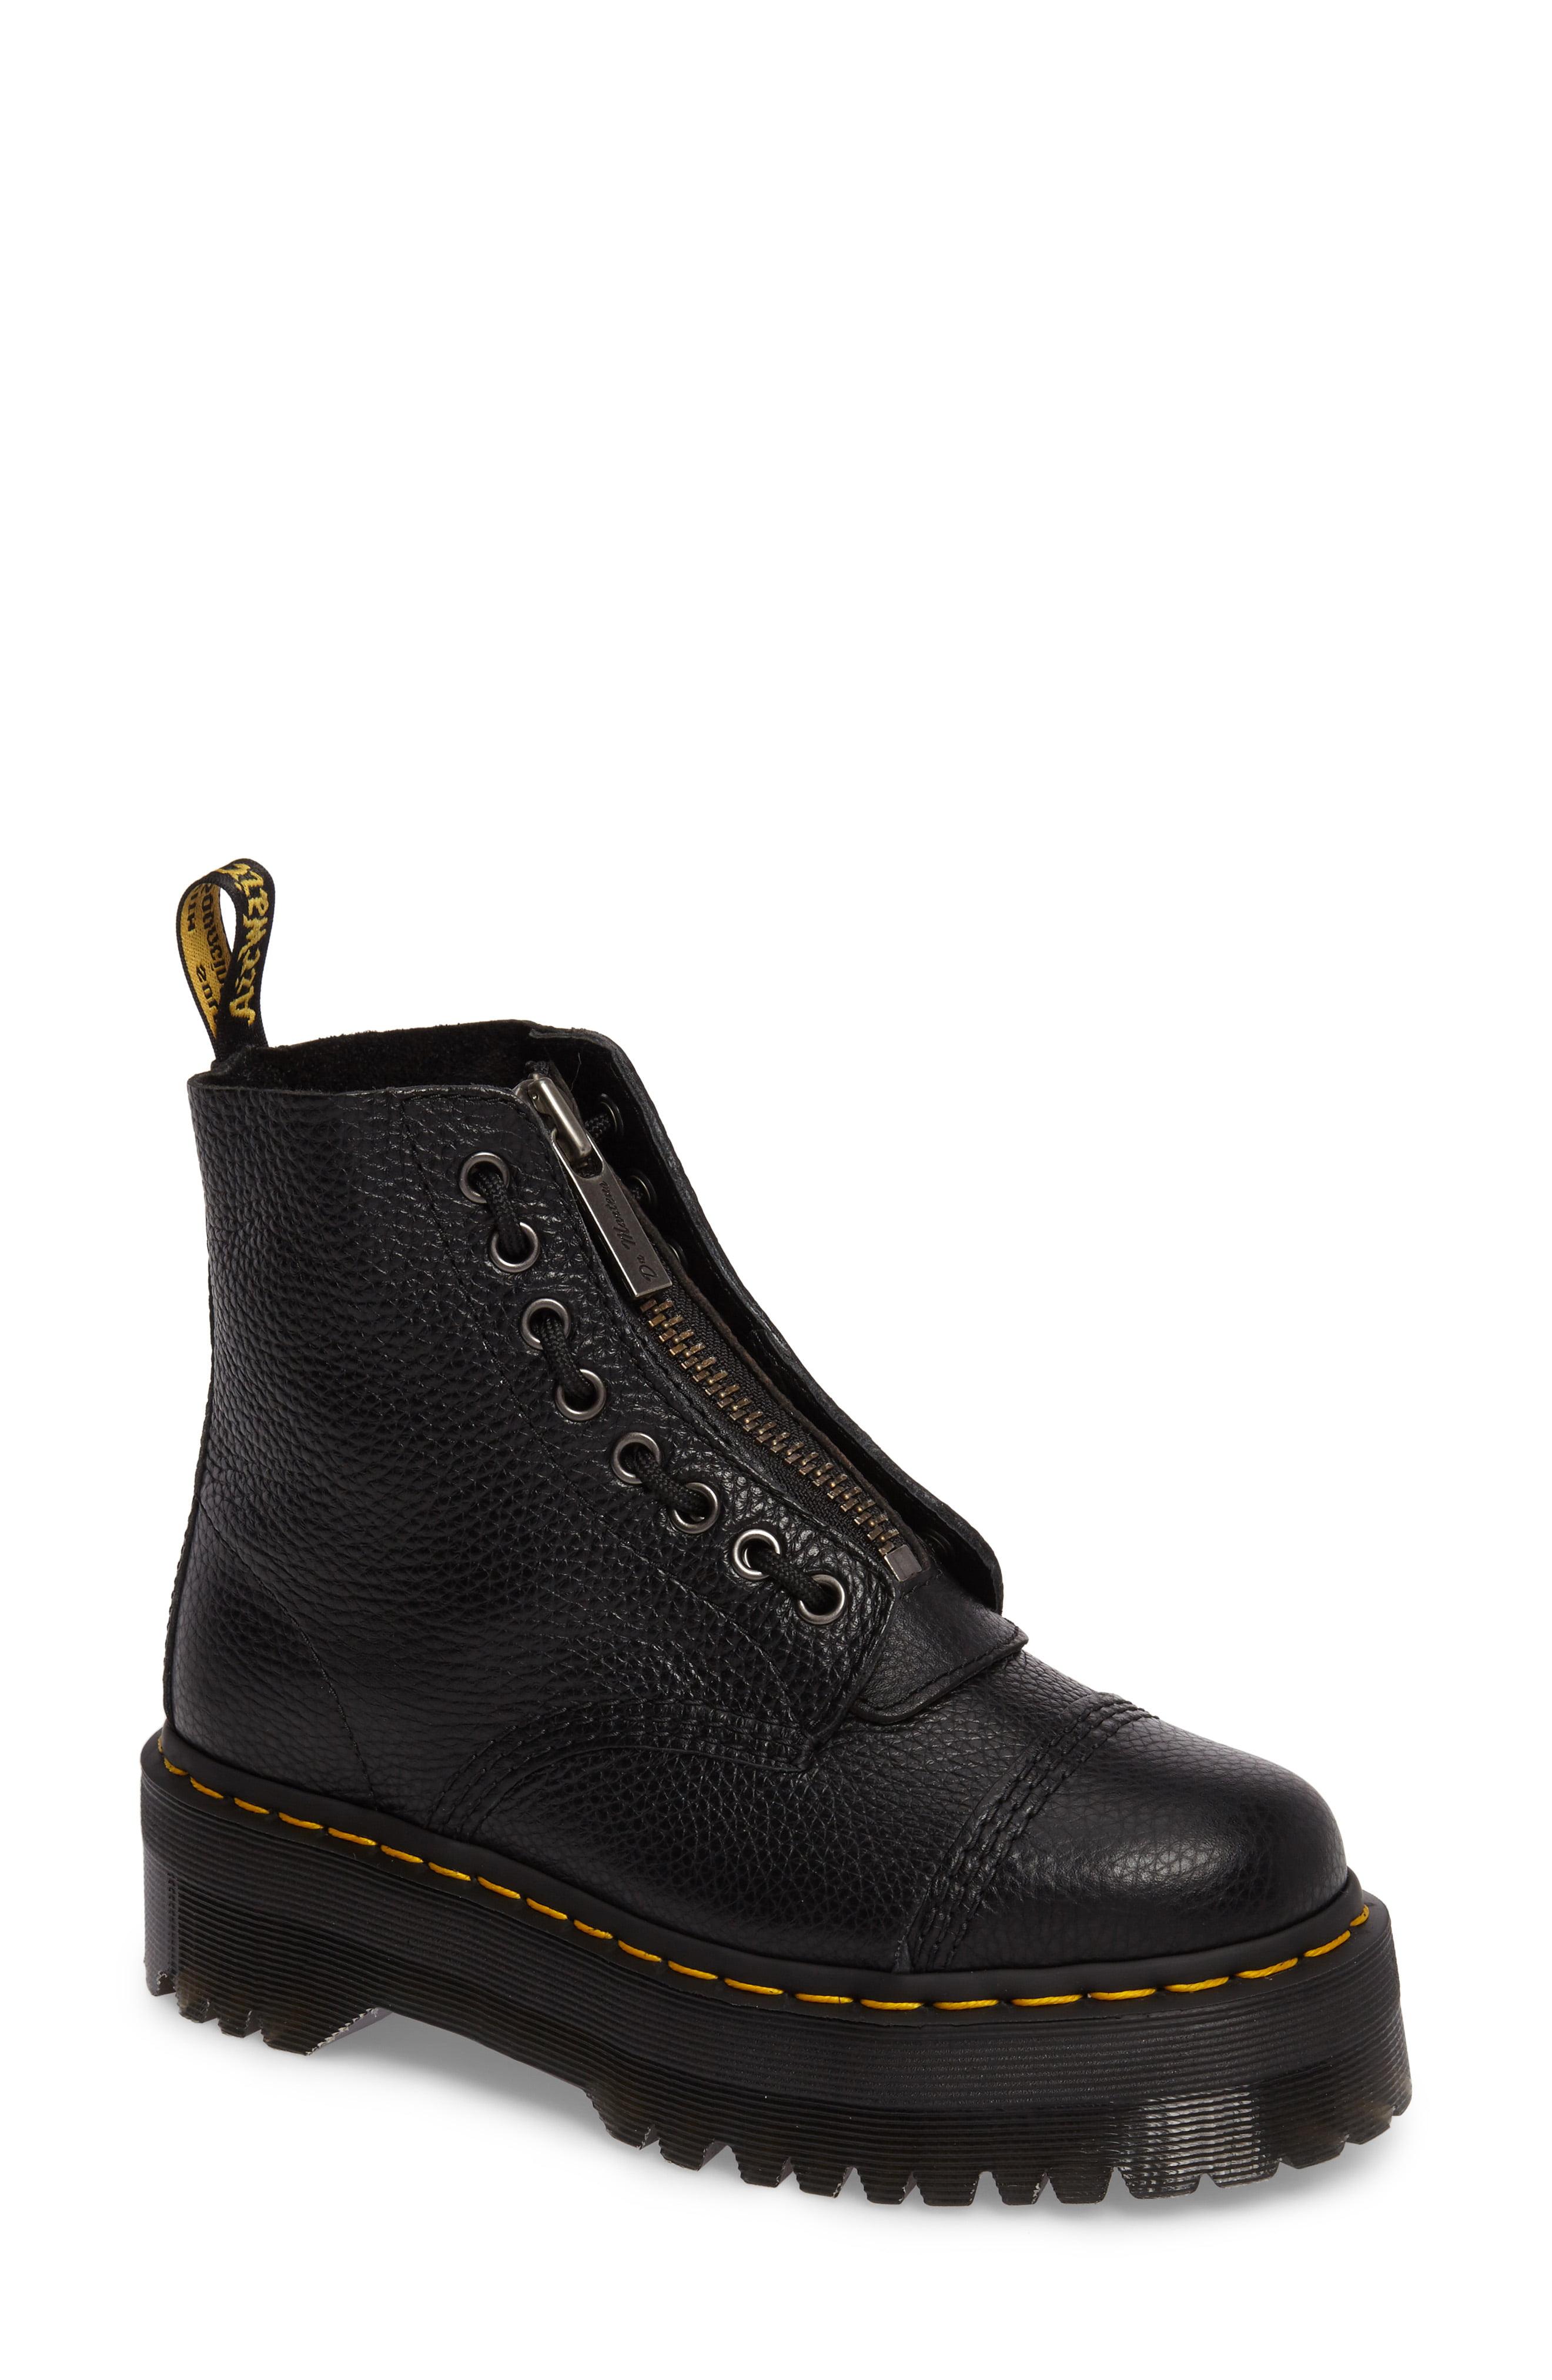 Dr. Martens Sinclair Bootie in Black Leather (Black) - Lyst